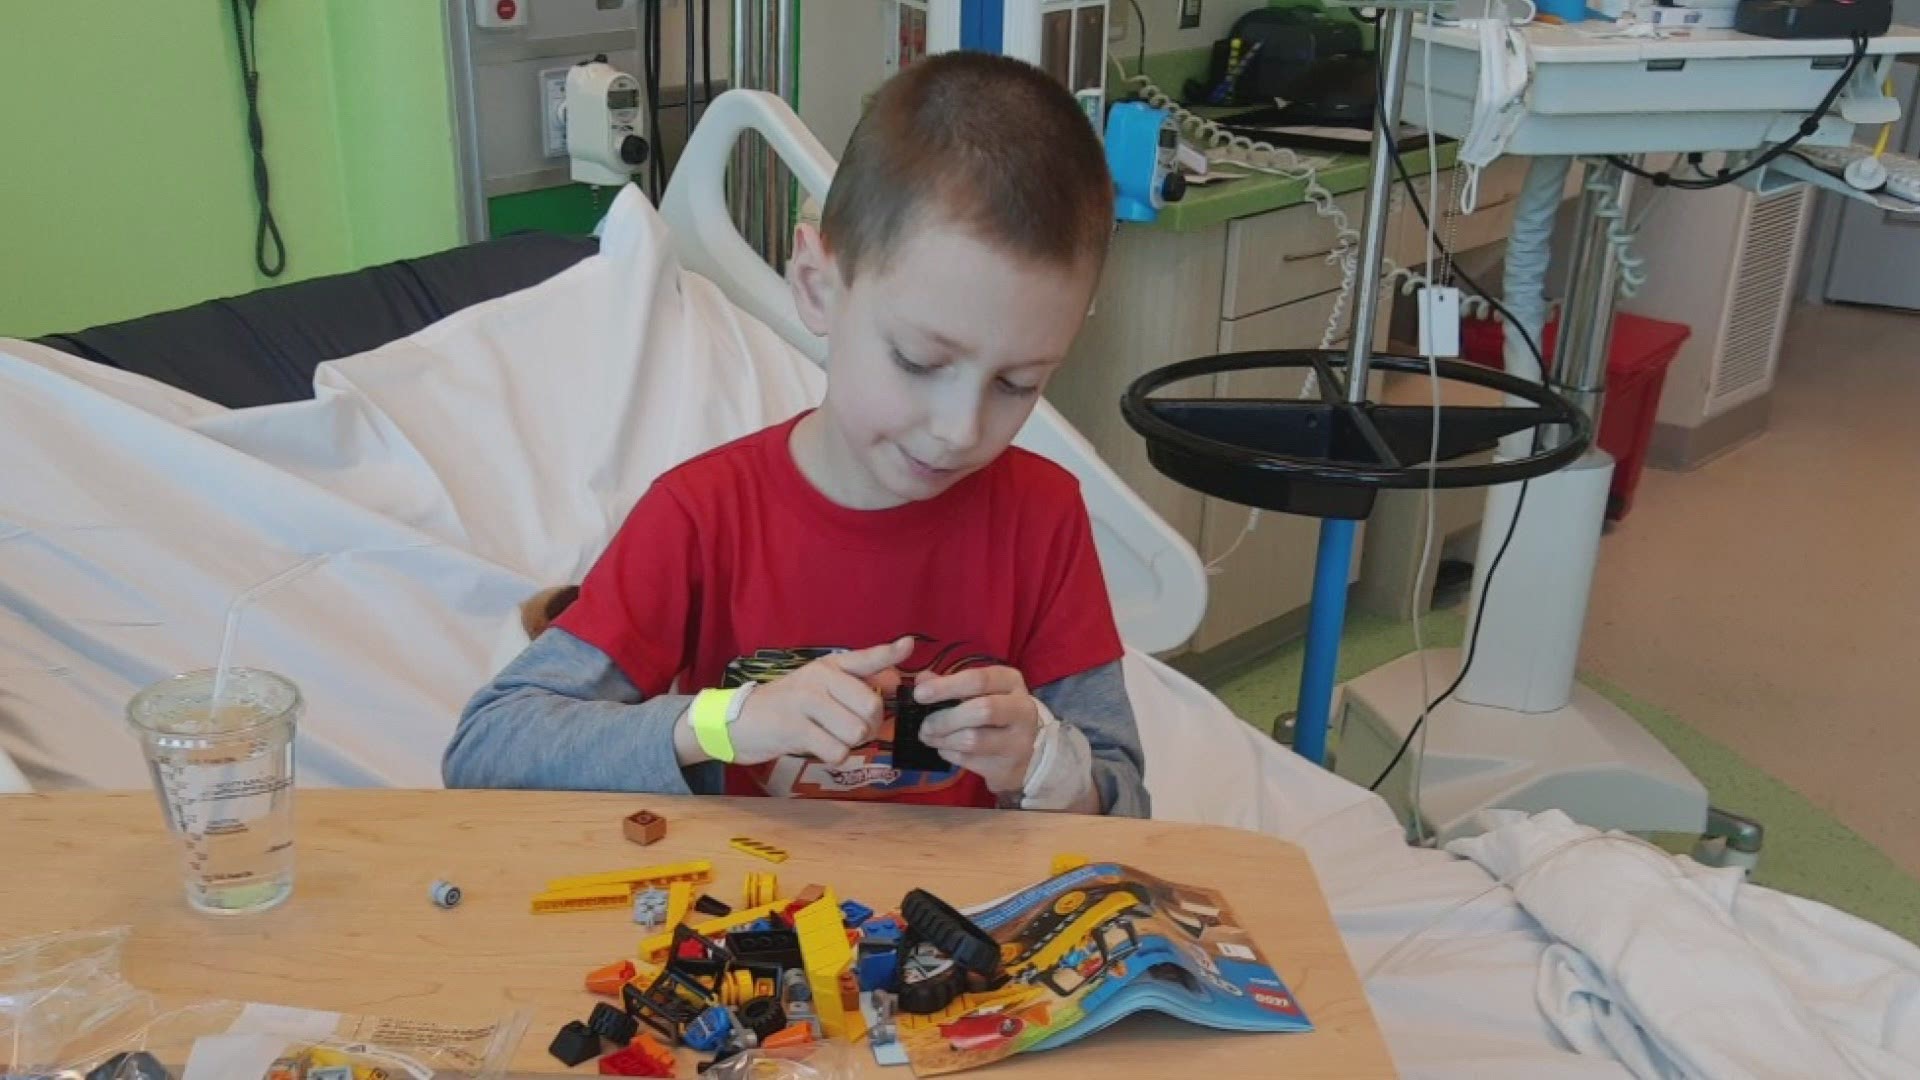 Curtis Oosterhart wants kids at Helen DeVos Children's Hospital to have something to comfort them like he did during his major surgery earlier this year.